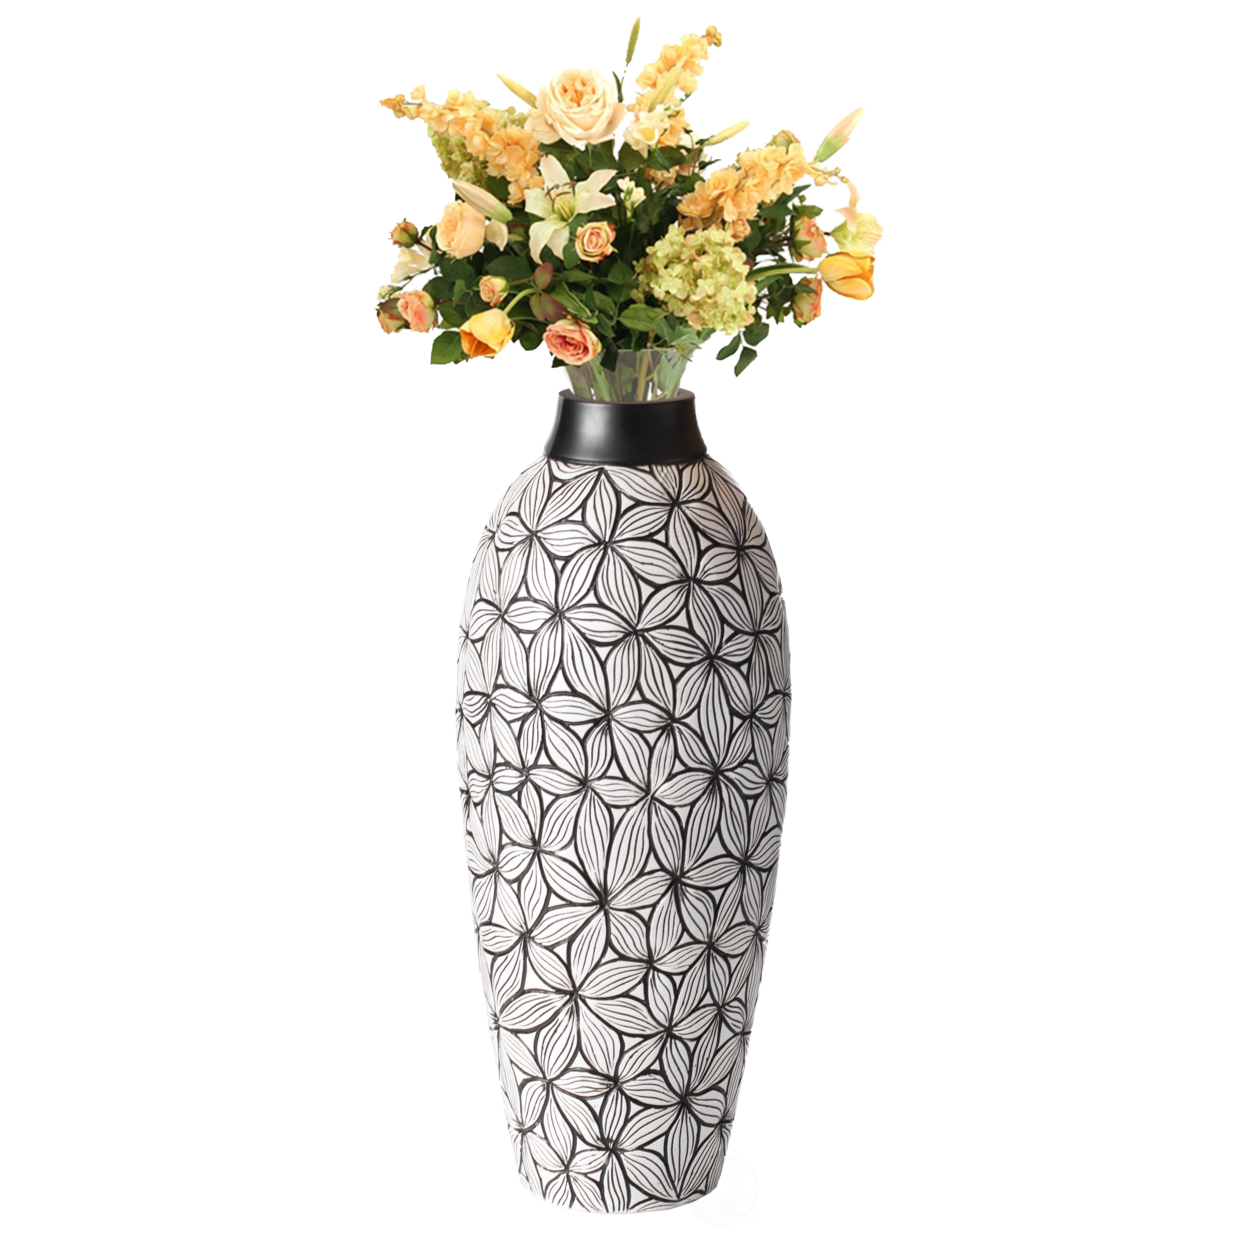 Unique Classic Style Flower Design Round Table Vase For Entryway Dining Or Living Room, Ceramic White